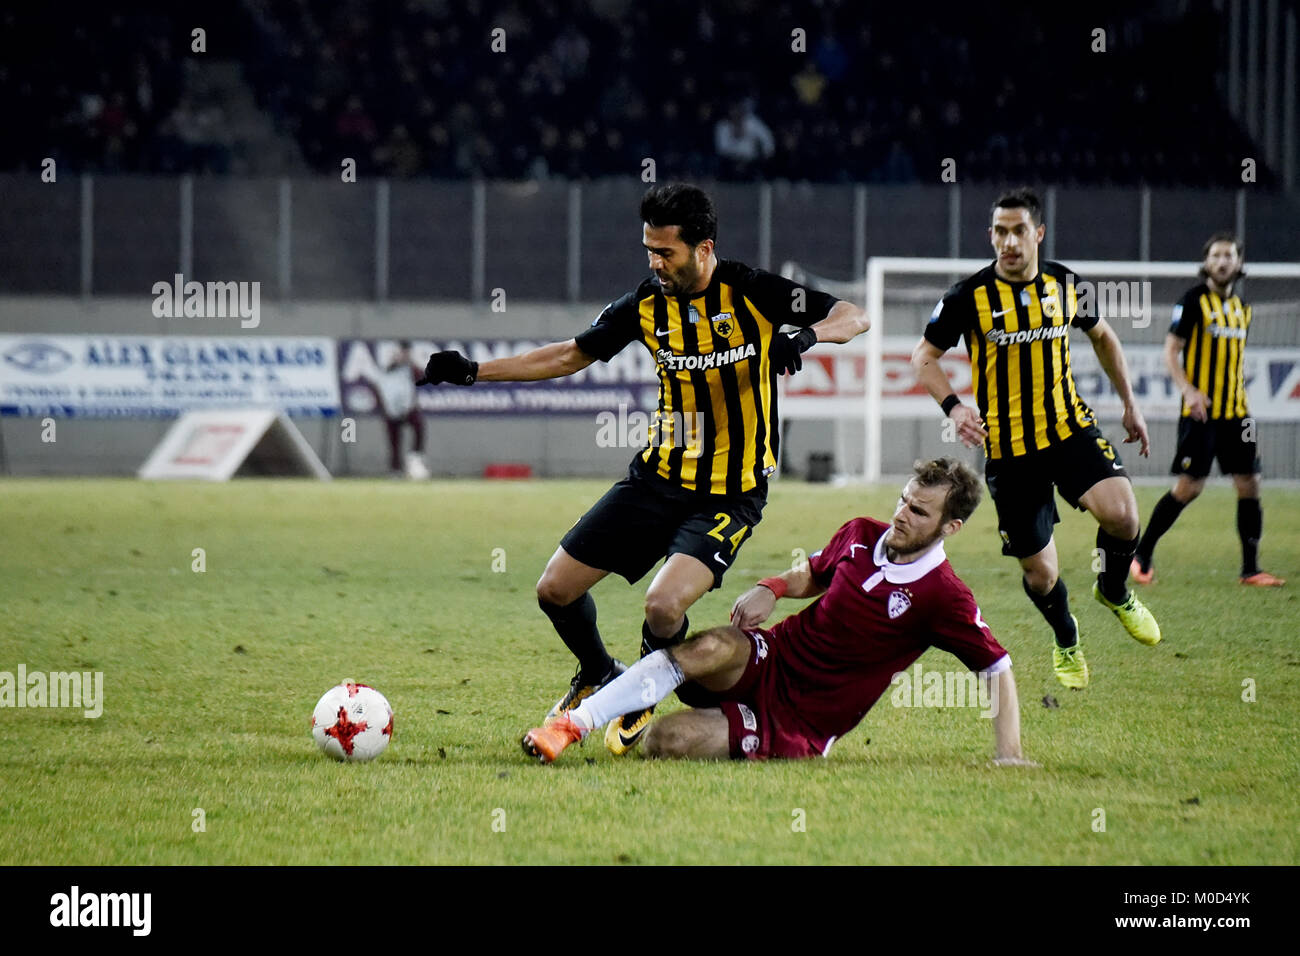 Larissa, Greece. 20th Jan, 2018. AEK FC midfielder Masoud Shojaei (Left) in  action, during a Greek Superleague soccer match at the Greek city of  Larissa between AEL FC and AEK FC. The